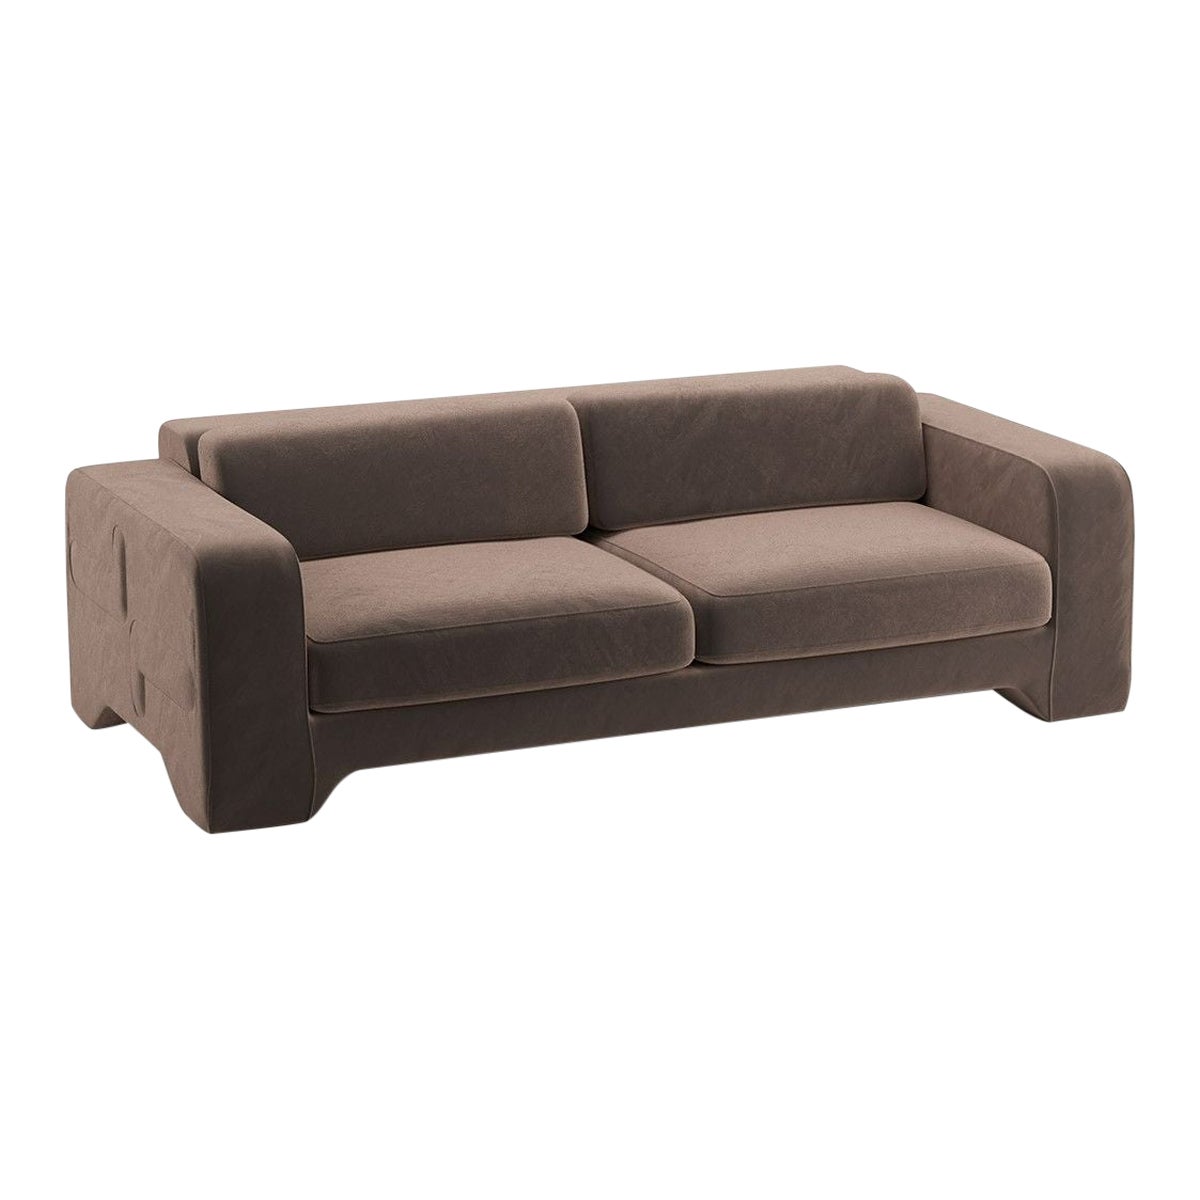 Popus Editions Giovanna 4 Seater Sofa in Mole Como Velvet Upholstery For Sale